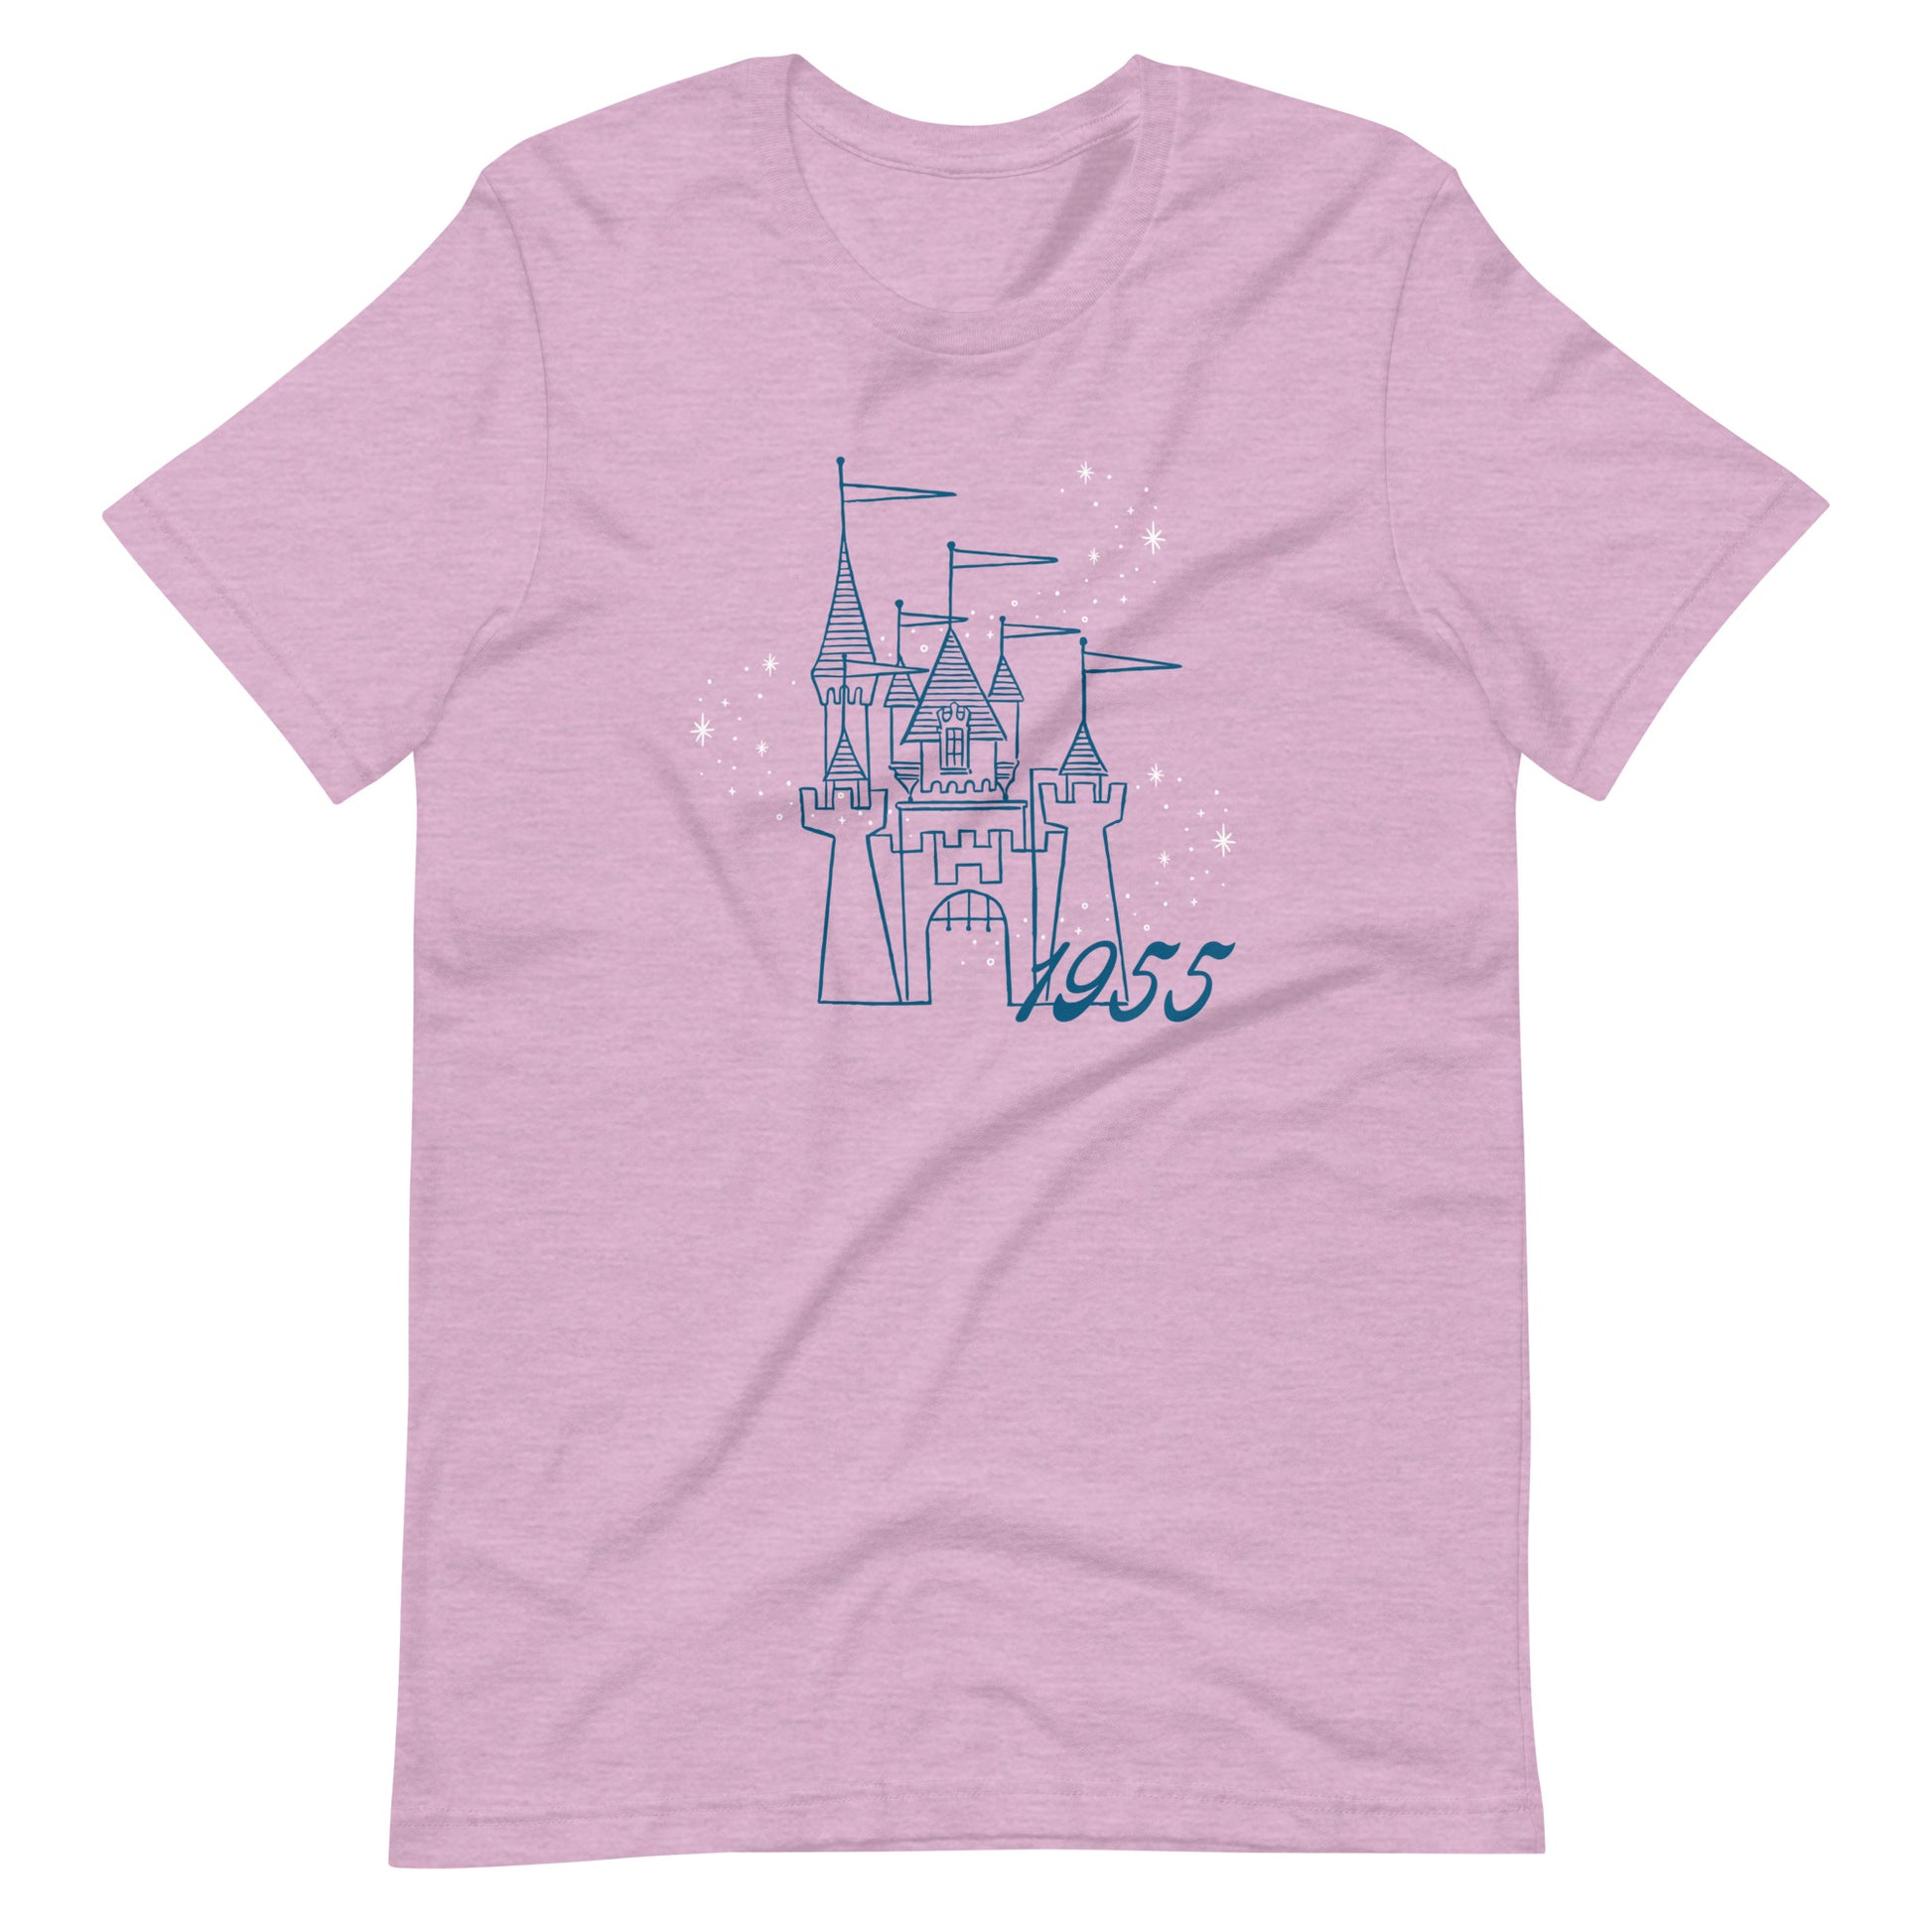 Purple t-shirt printed with vintage style sketch of a castle with the year 1955 and pixie dust above the castle.